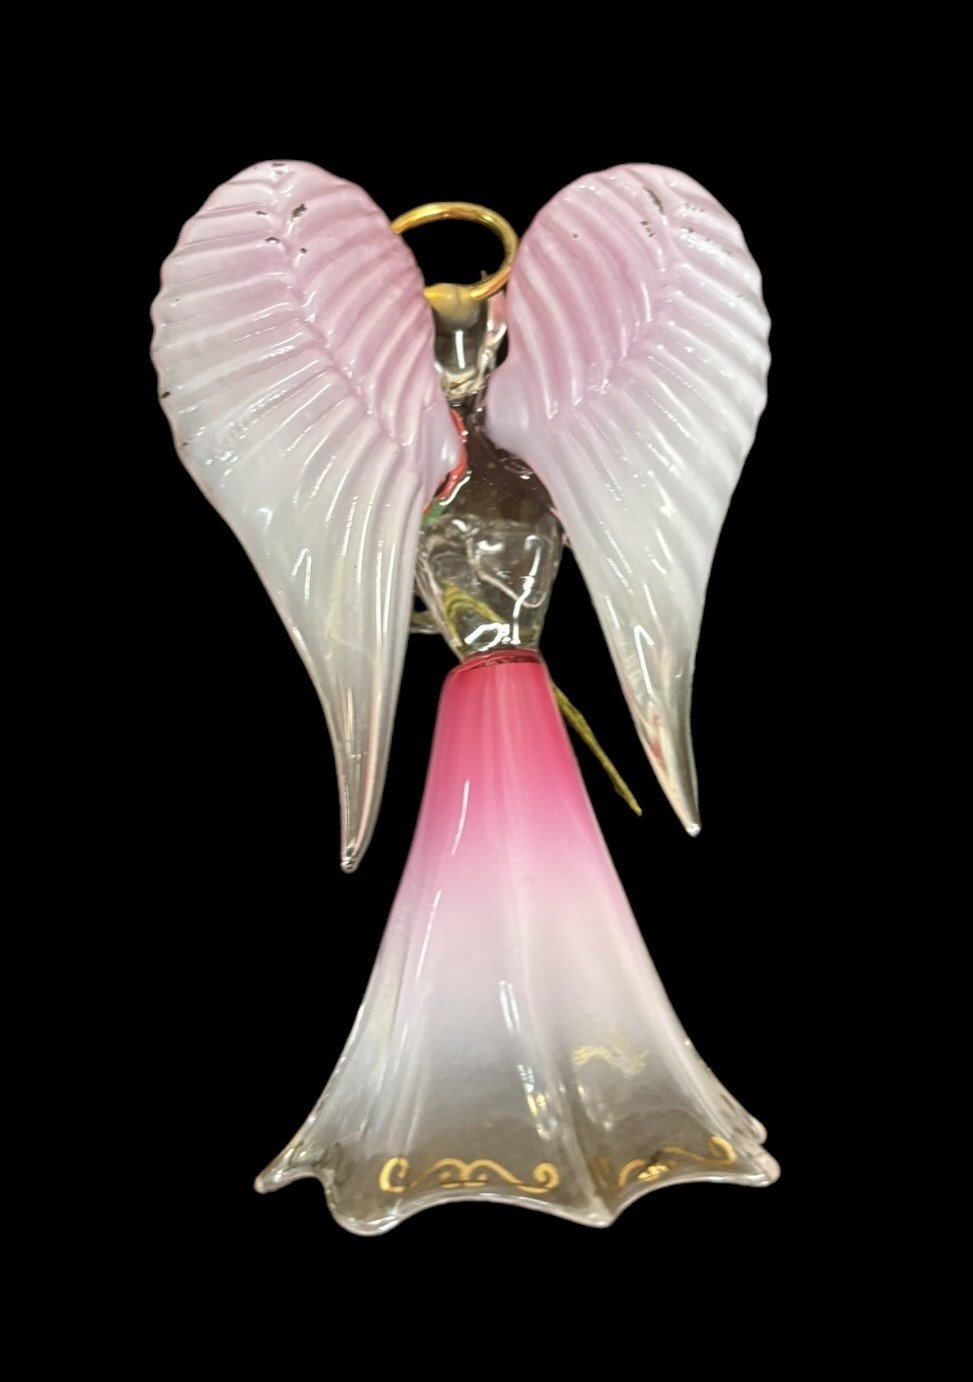 Glass Baron Red Angelique Figurine Pink Gold Angel Sculpture Home Decor